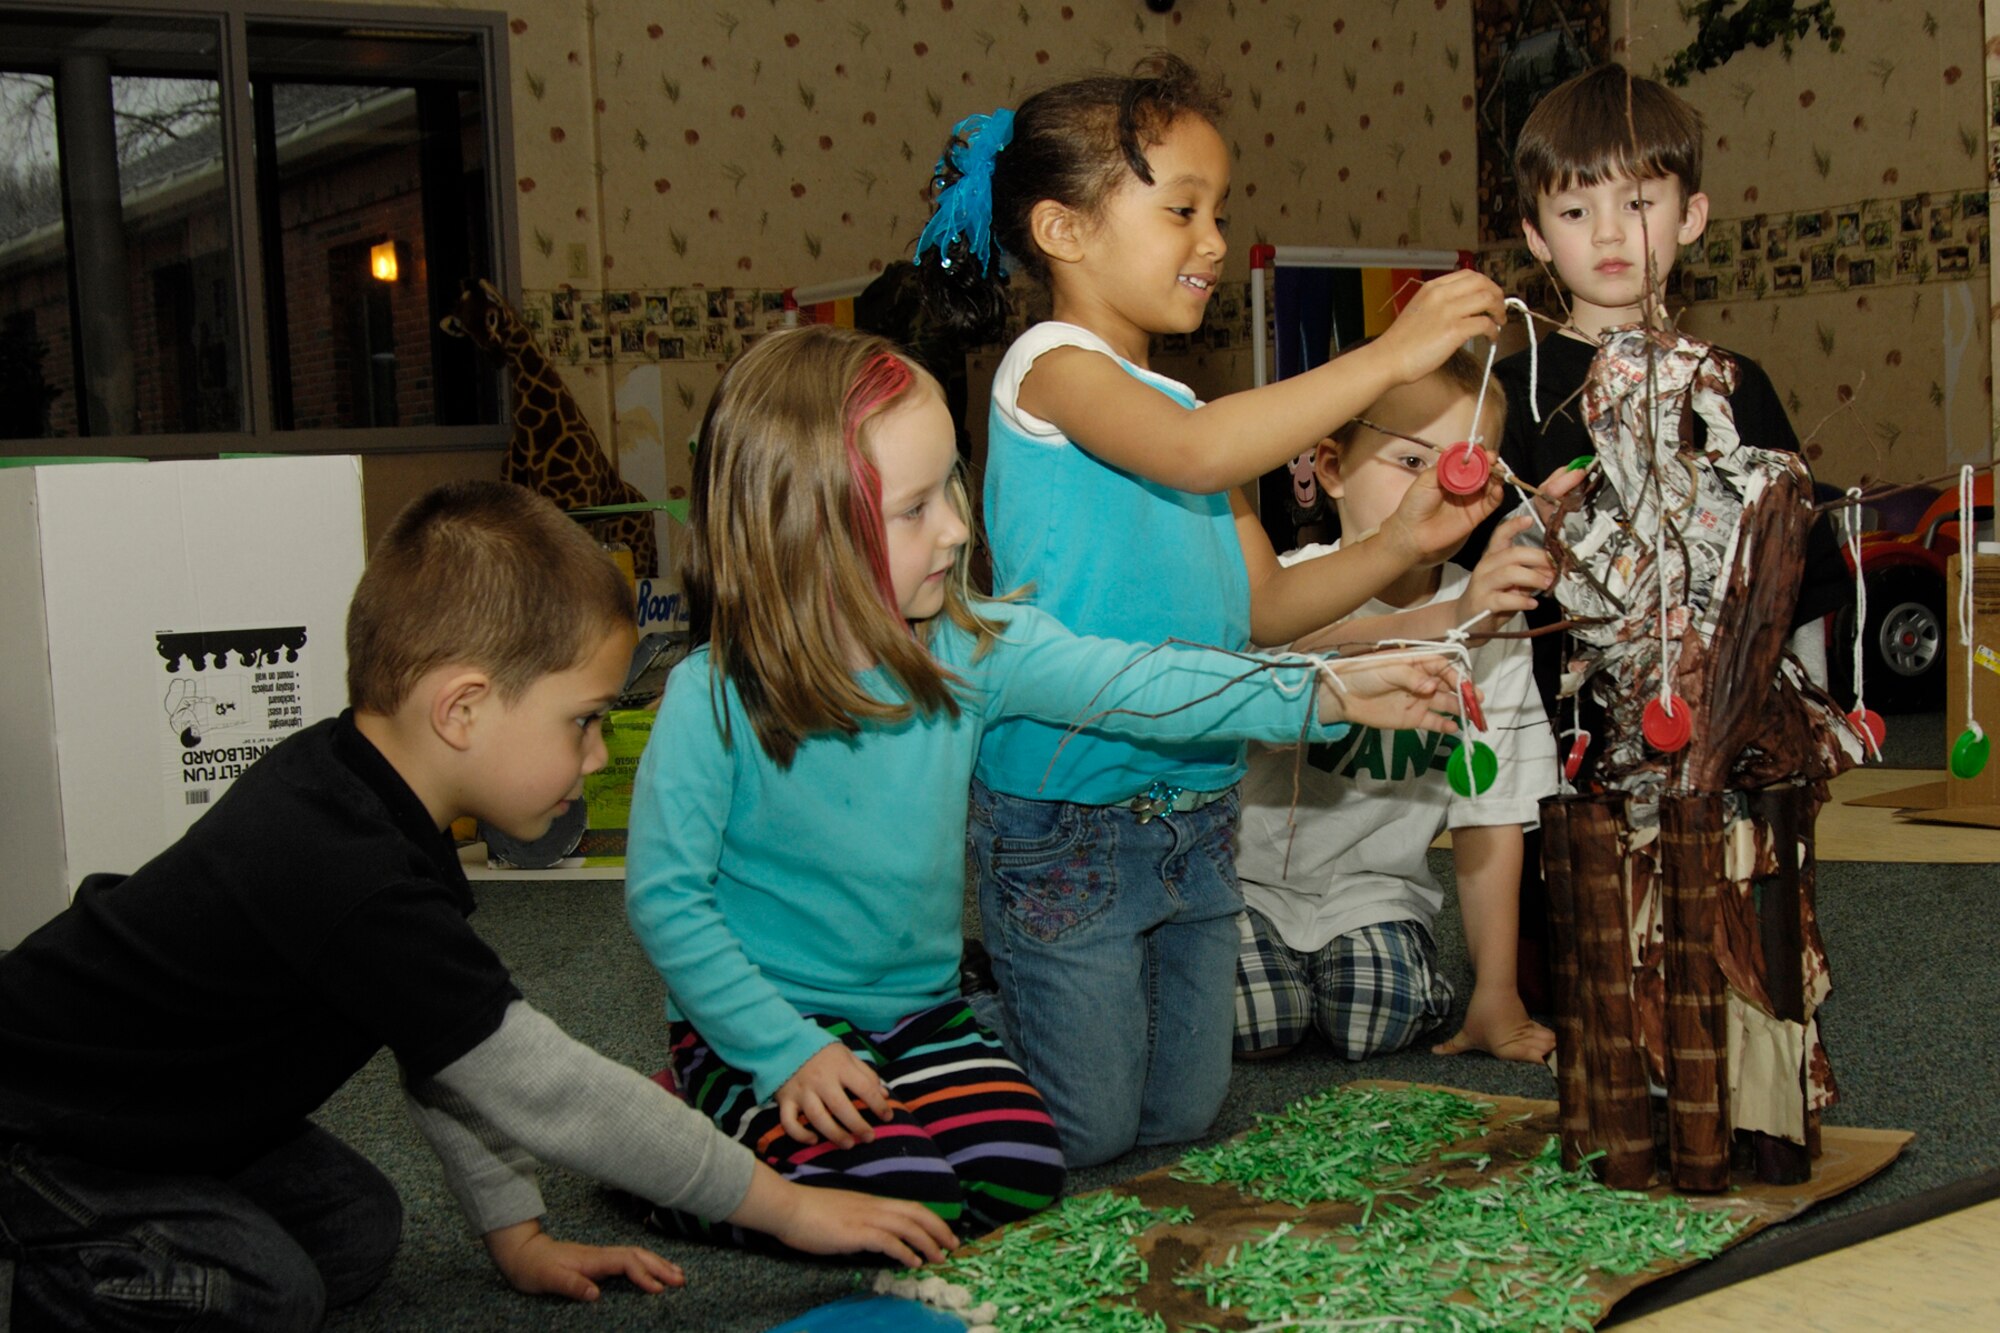 HANSCOM AIR FORCE BASE, Mass. – Hanscom Child Development Center students, from left to right, Elijah Manning, Lauryn Friess, Claire Murphy, Carter Hensley and Timmy Vadnais, put the finishing touches on their recycled art sculpture. Children learned about recycling and taking care of the environment during one of the CDC’s Month of the Military Child activities.  (U.S. Air Force photo by Linda LaBonte Britt)